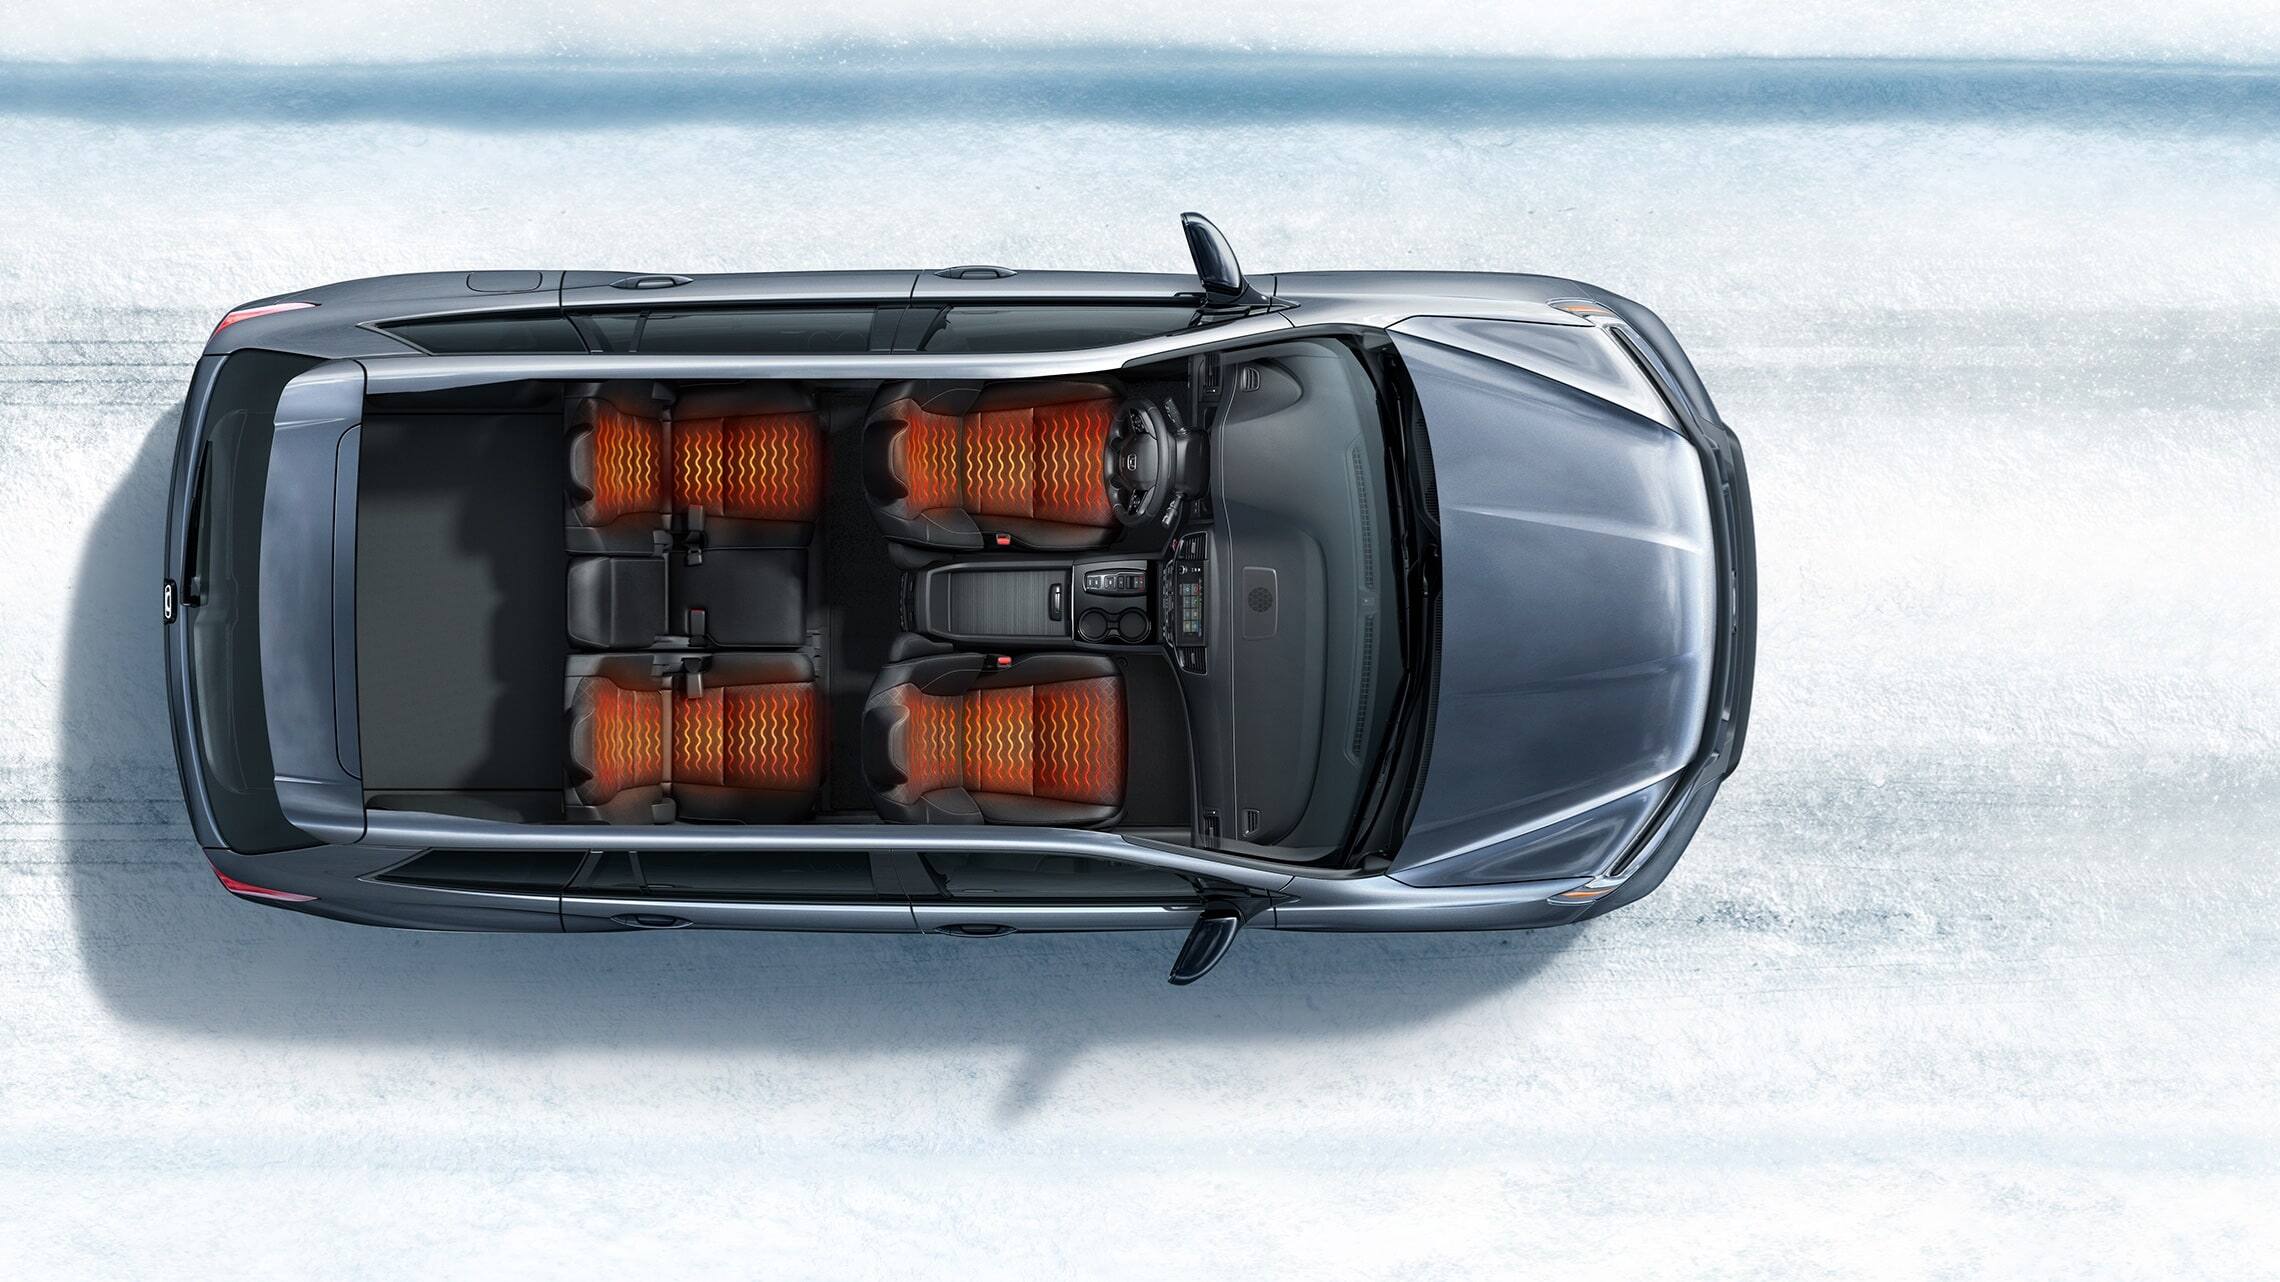 Overhead view of 2019 Honda Passport Elite demonstrating heated seats in a snowy road environment.